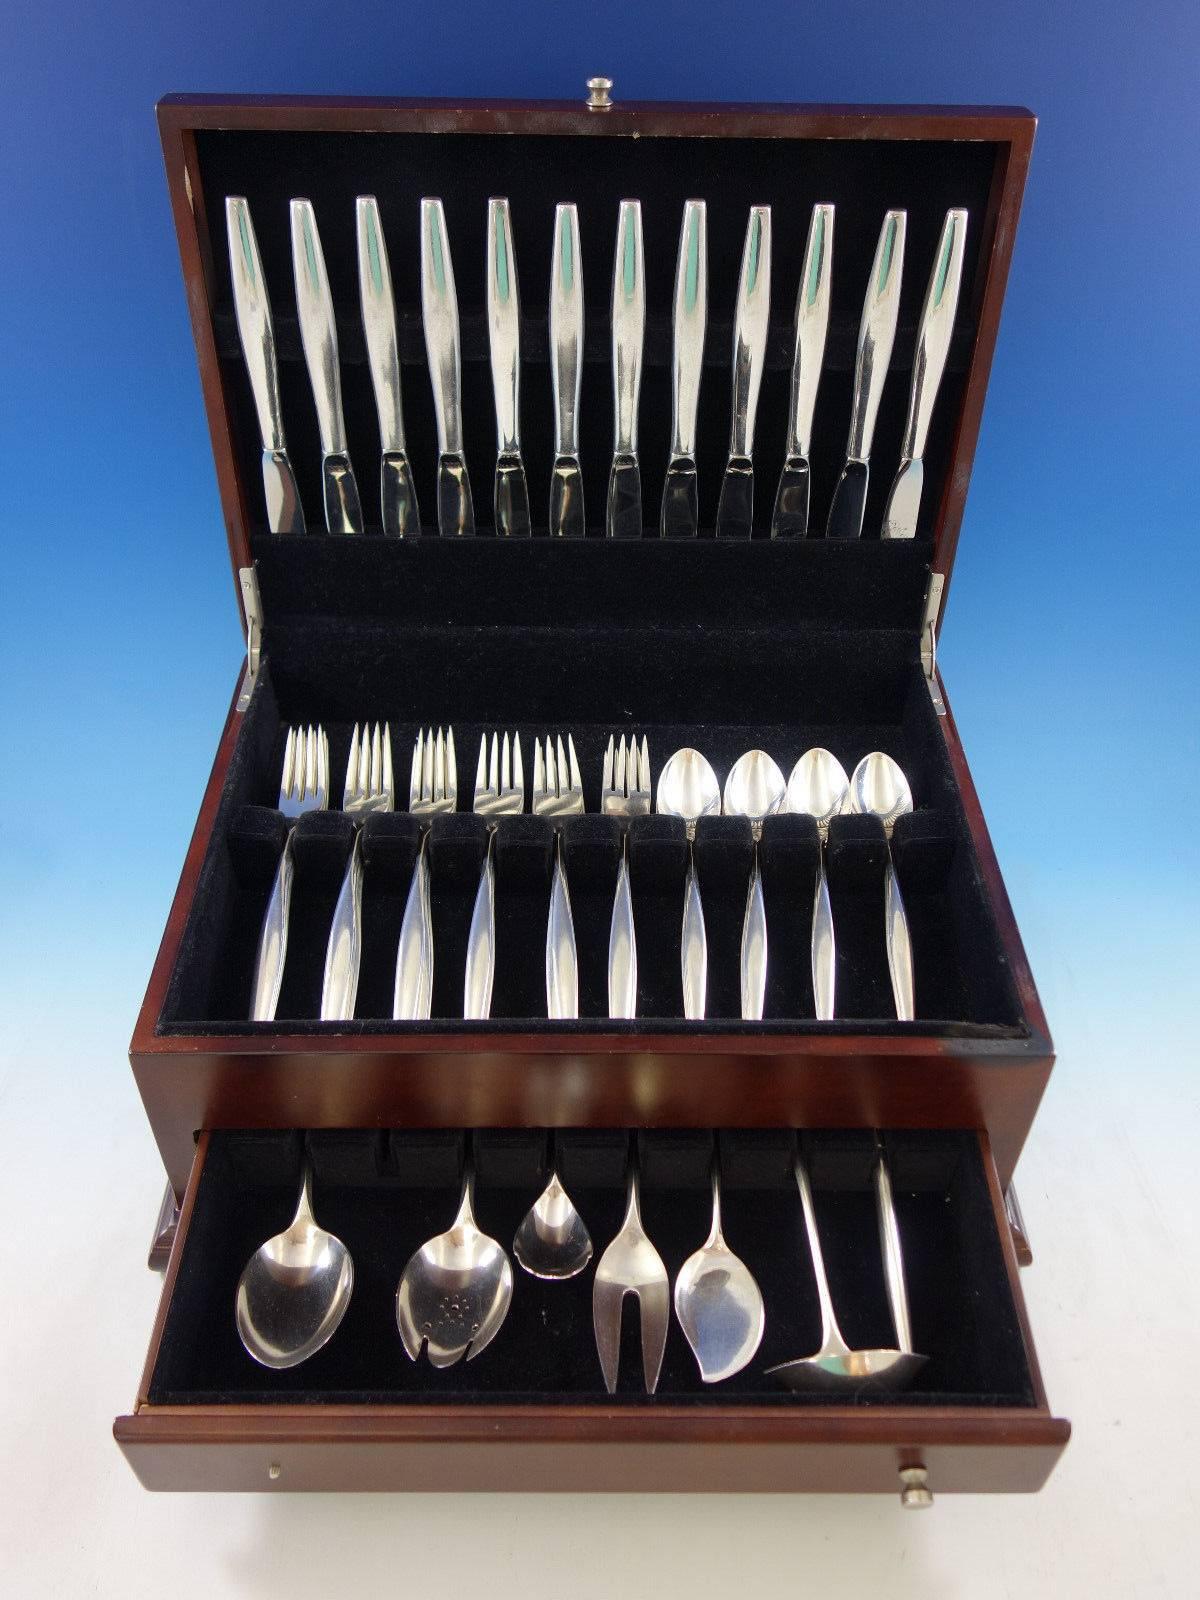 Signet by Kirk sterling silver flatware set, 55 pieces. This set includes: 

12 knives, 9